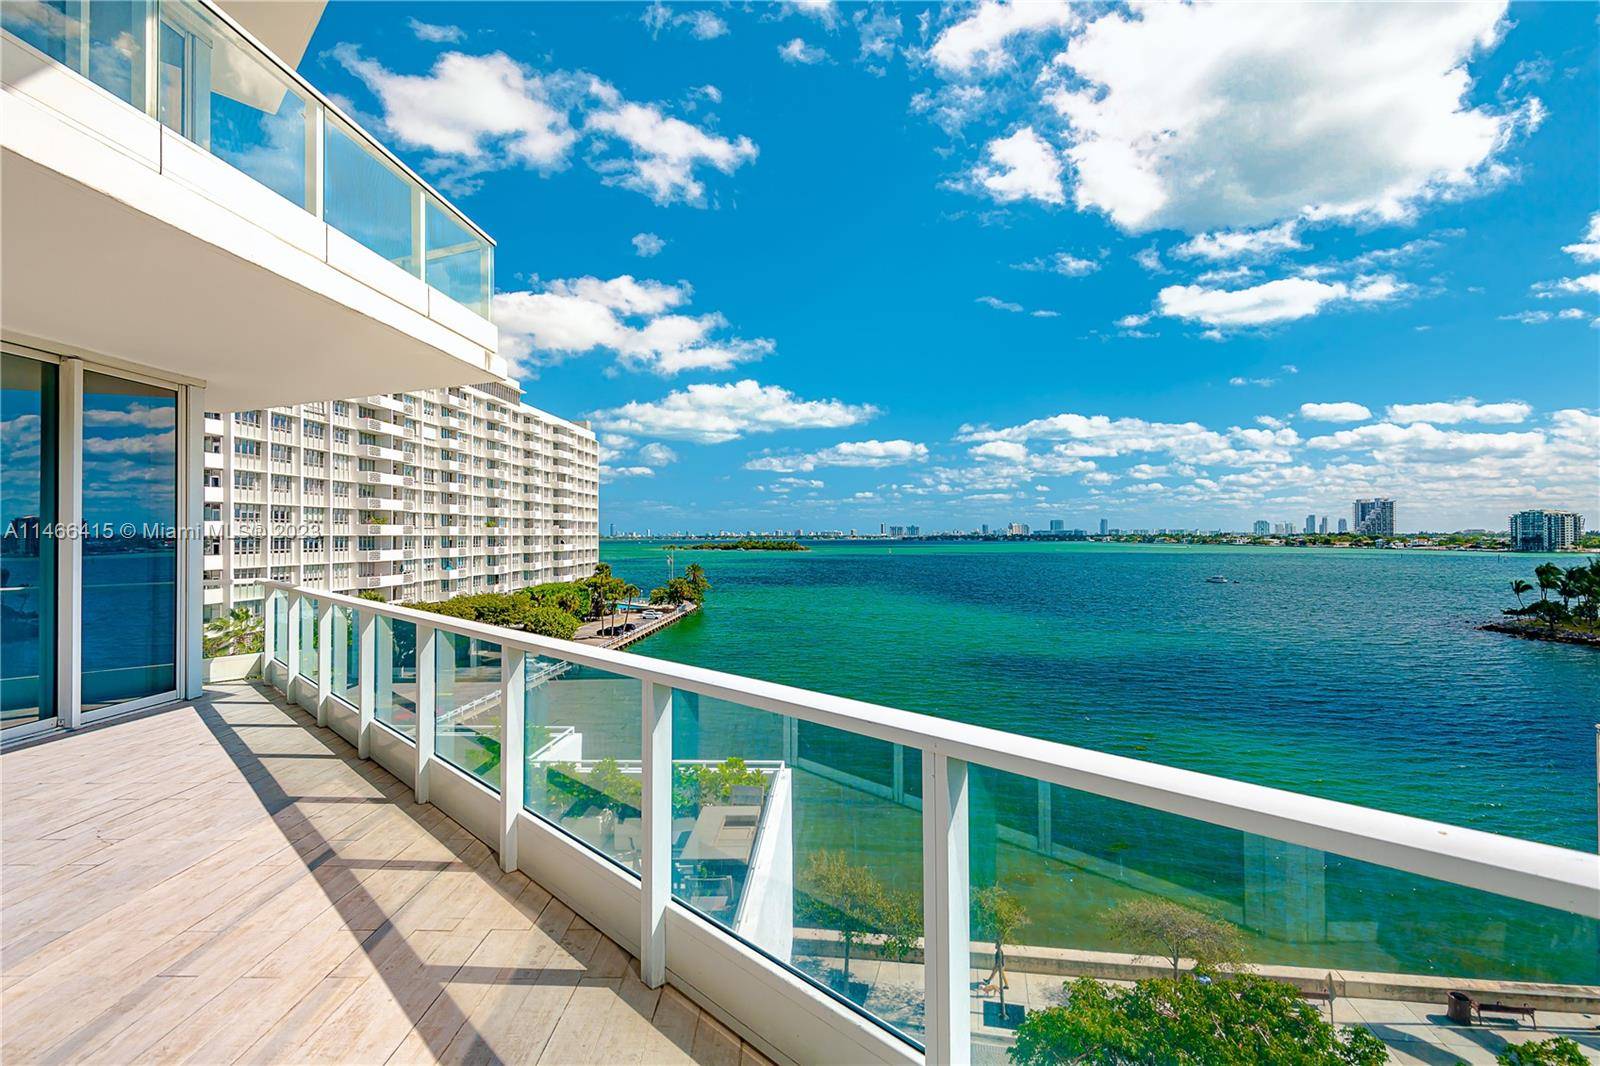 Beautiful 3 bedroom 3. 5 bathroom unit with the best view that Biscayne Bay, 3 balconies, two direct elevators opening directly into the unit, solid wood floors and top of ...